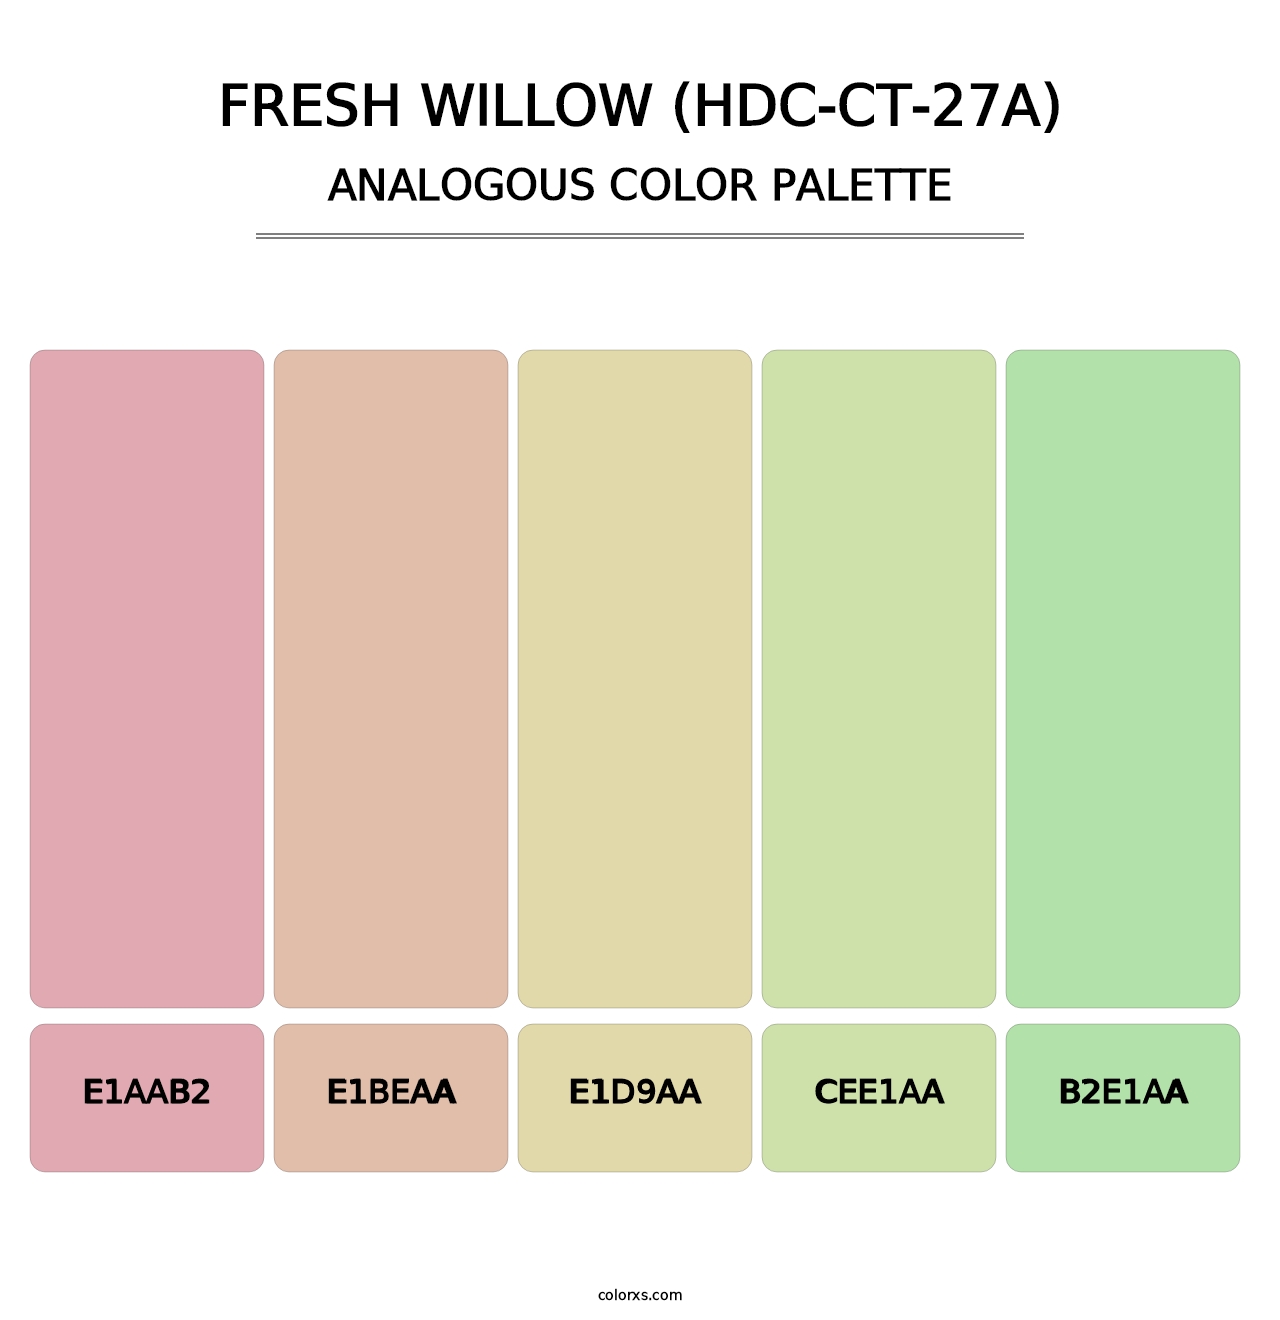 Fresh Willow (HDC-CT-27A) - Analogous Color Palette